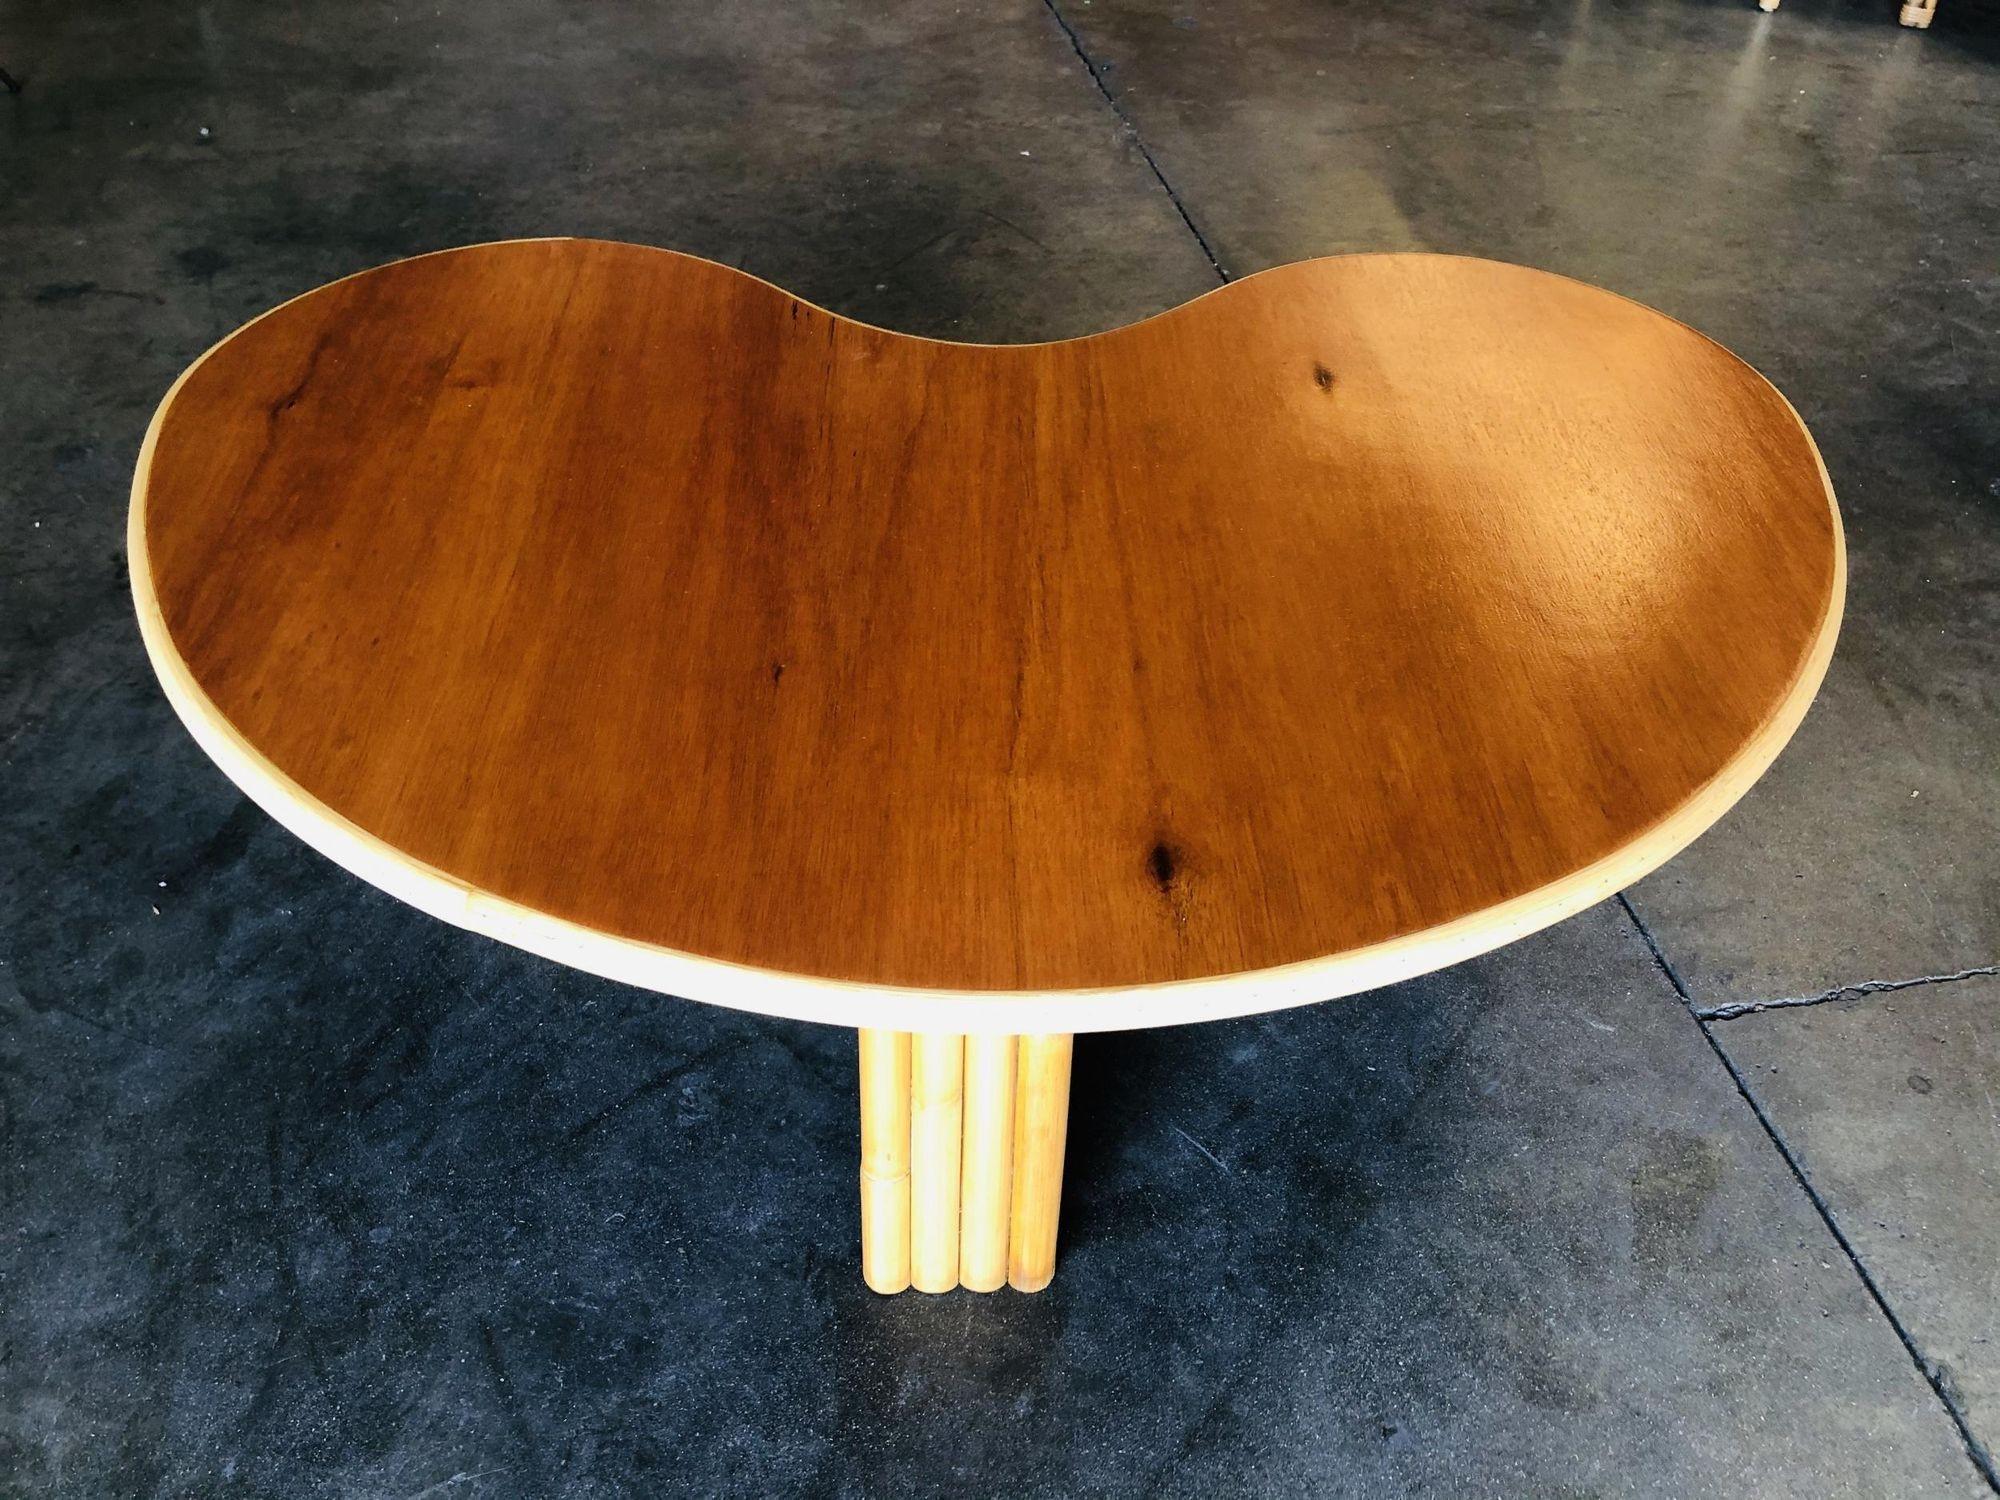 Restored Biomorphic Rattan & Mahogany Coffee Table W/ Tri Stacked Legs In Excellent Condition For Sale In Van Nuys, CA